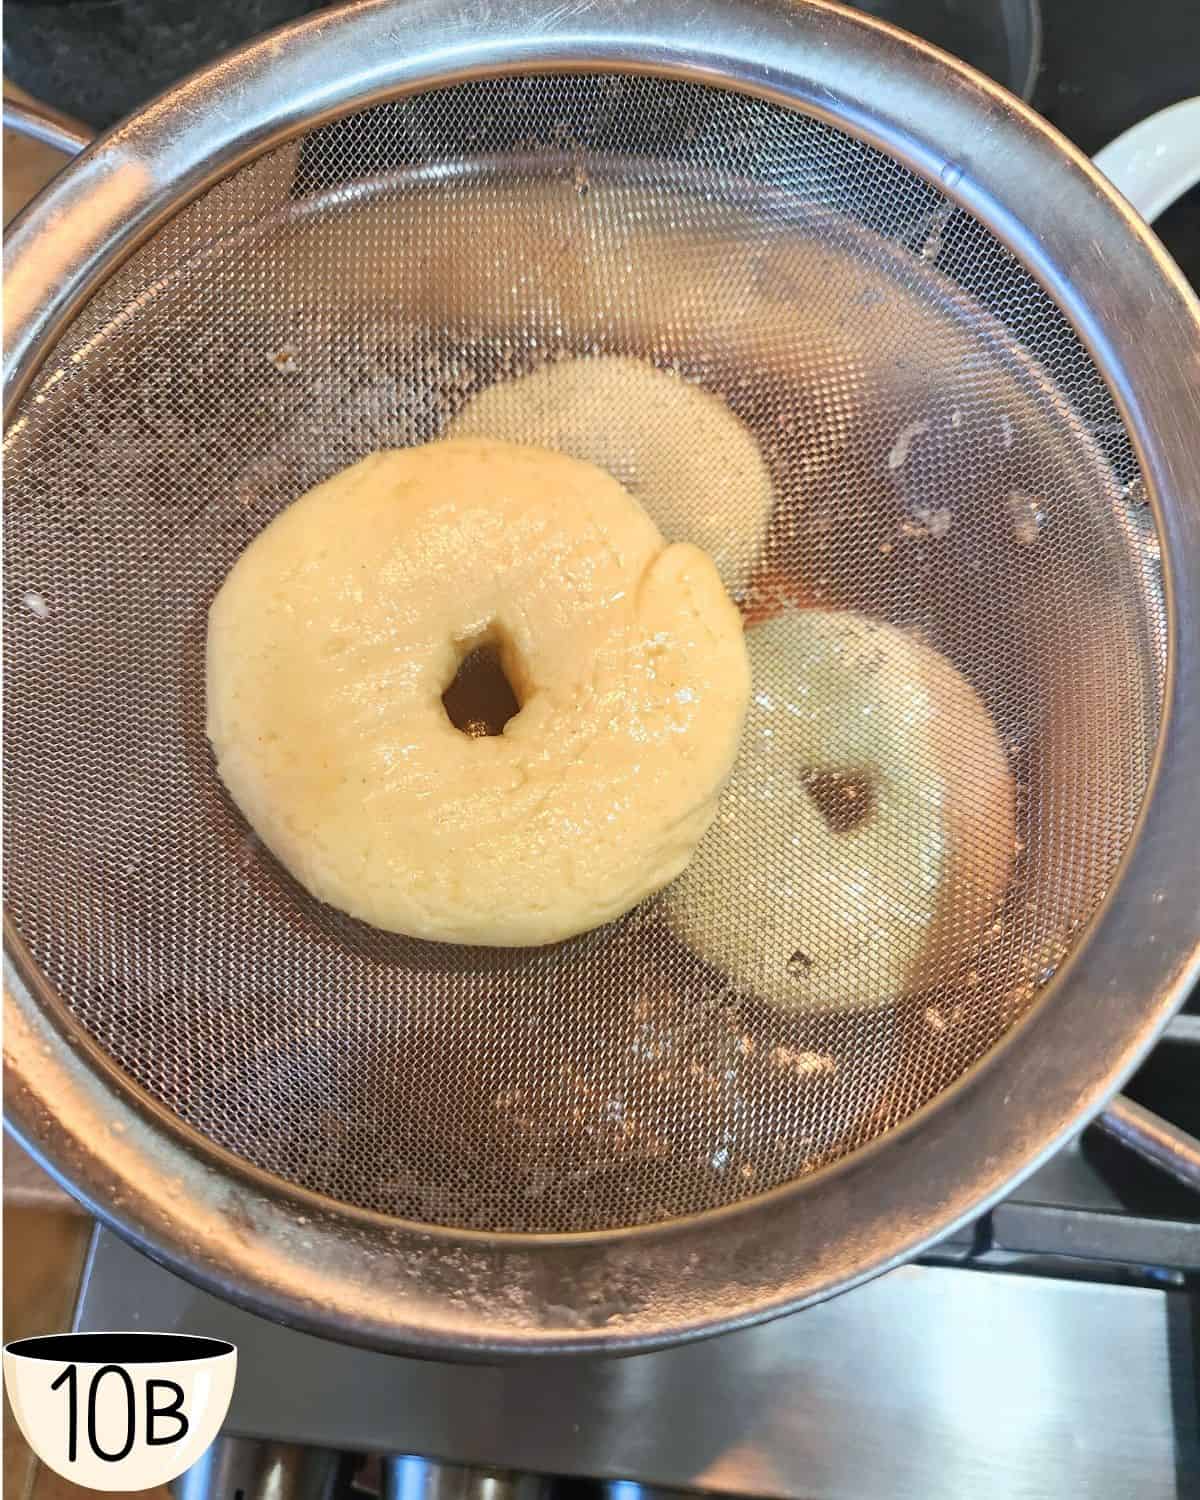 Three bagel being boiled in sugar water with one bagel being removed with a fine mesh sieve.